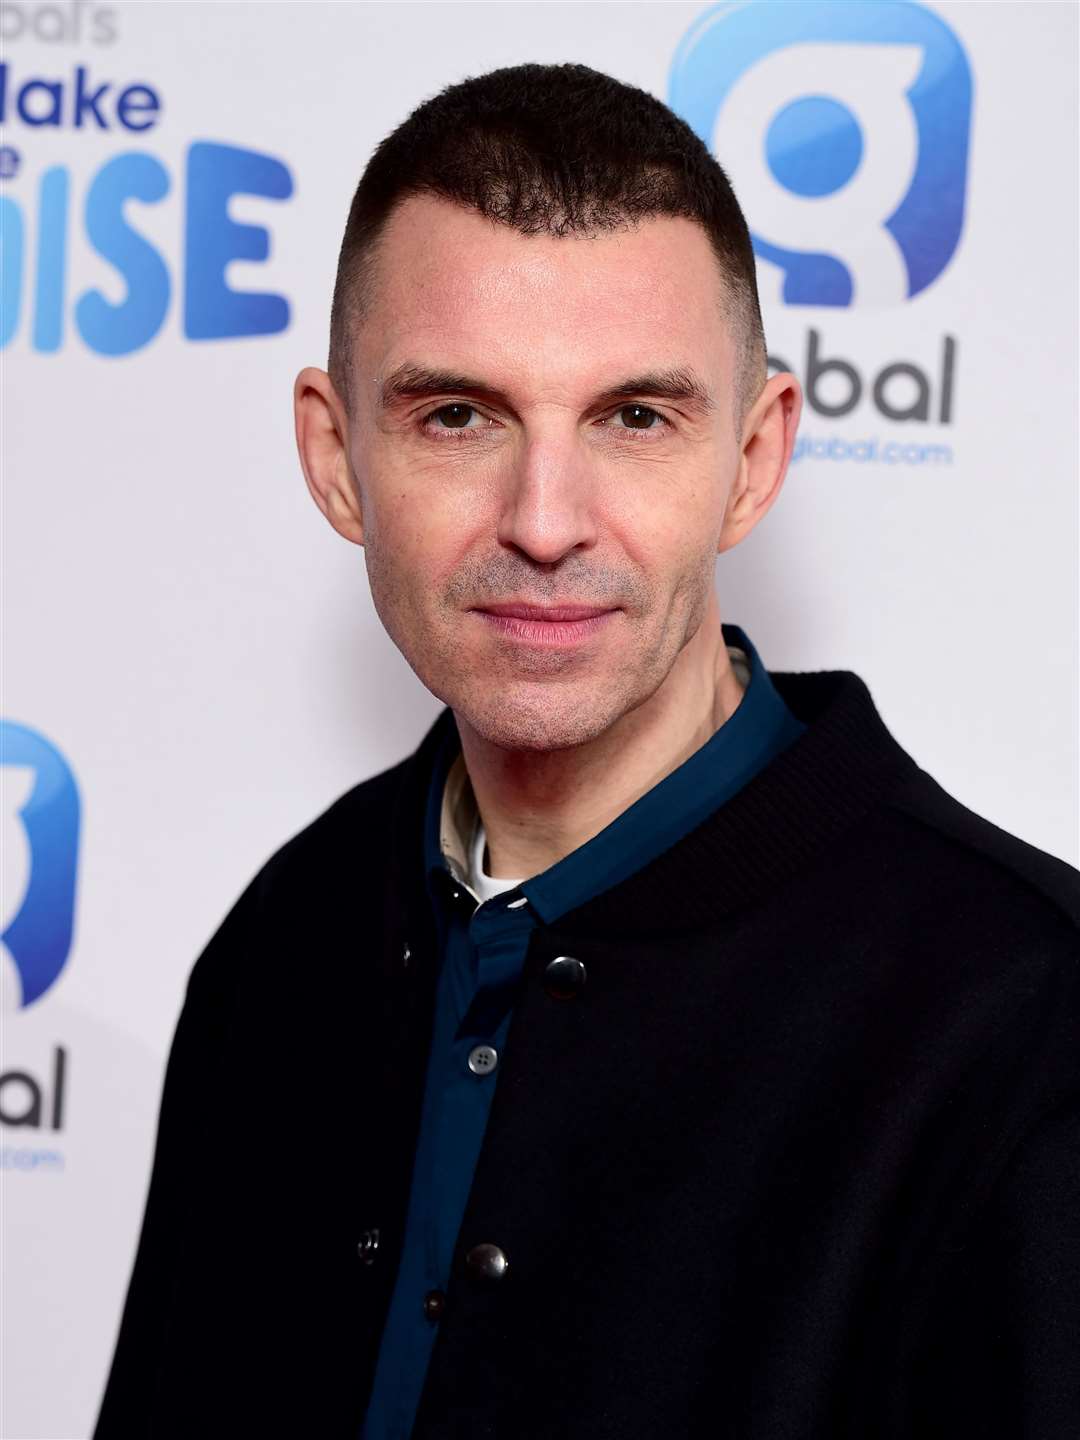 Tim Westwood denies allegations of sexual misconduct (PA)